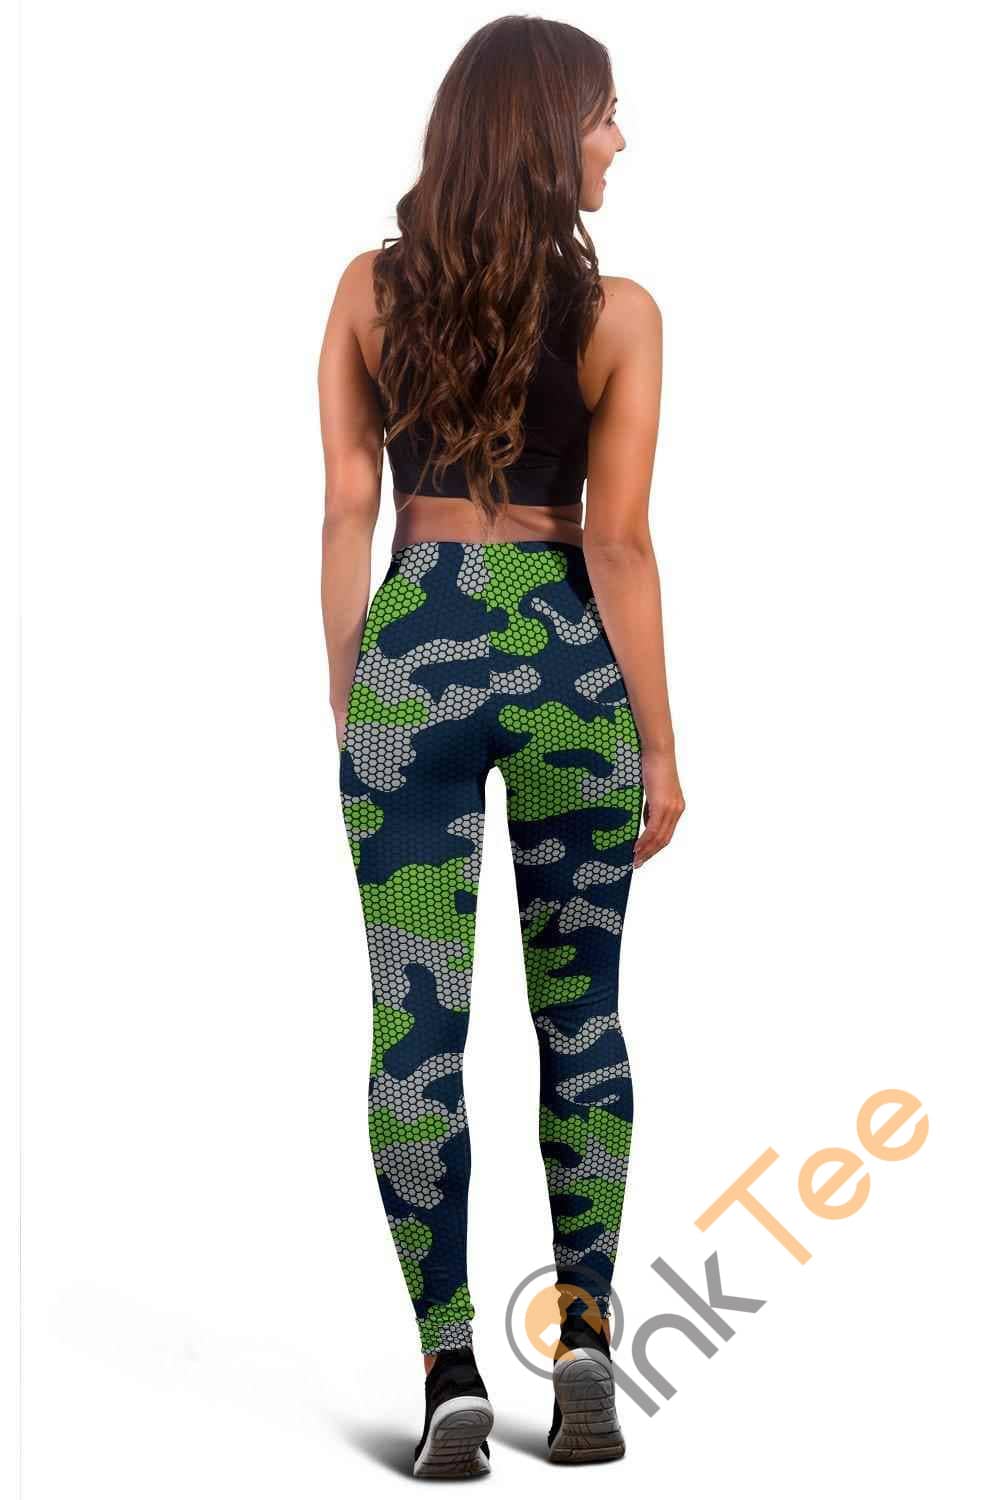 Inktee Store - Seattle Seahawks Inspired Hex Camo 3D All Over Print For Yoga Fitness Fashion Women'S Leggings Image